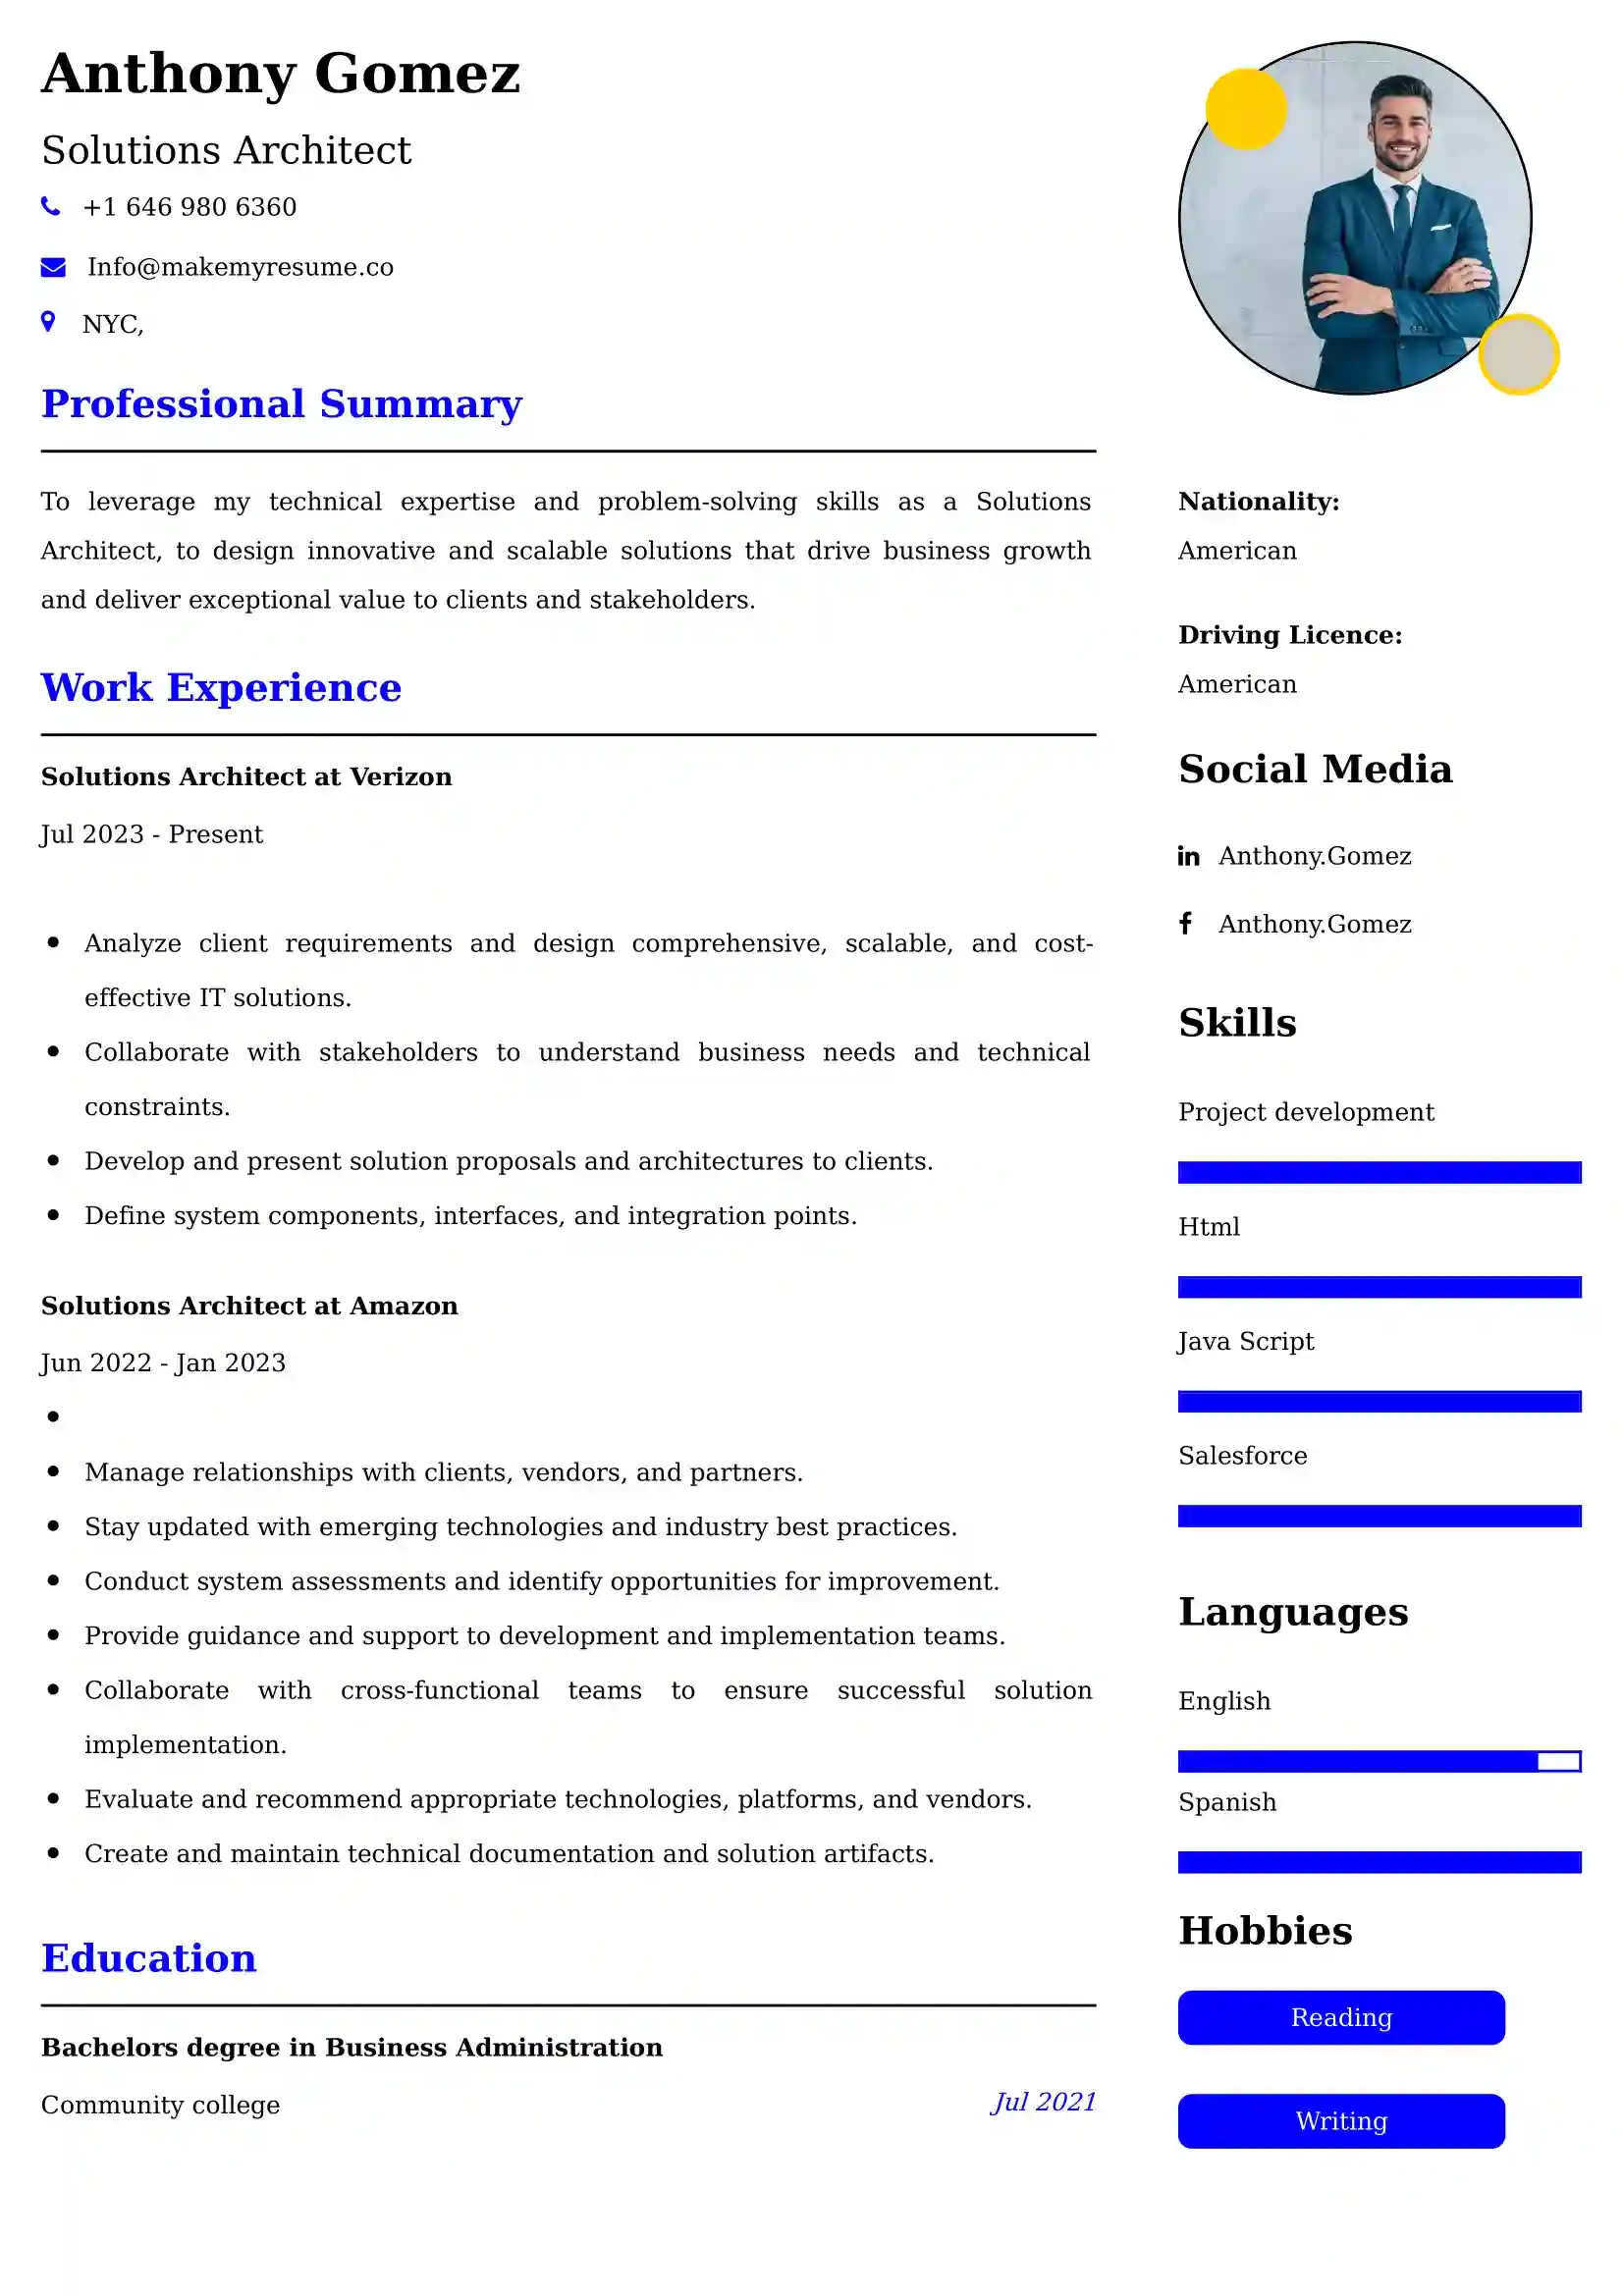 Solutions Architect Resume Examples - Australian Format and Tips